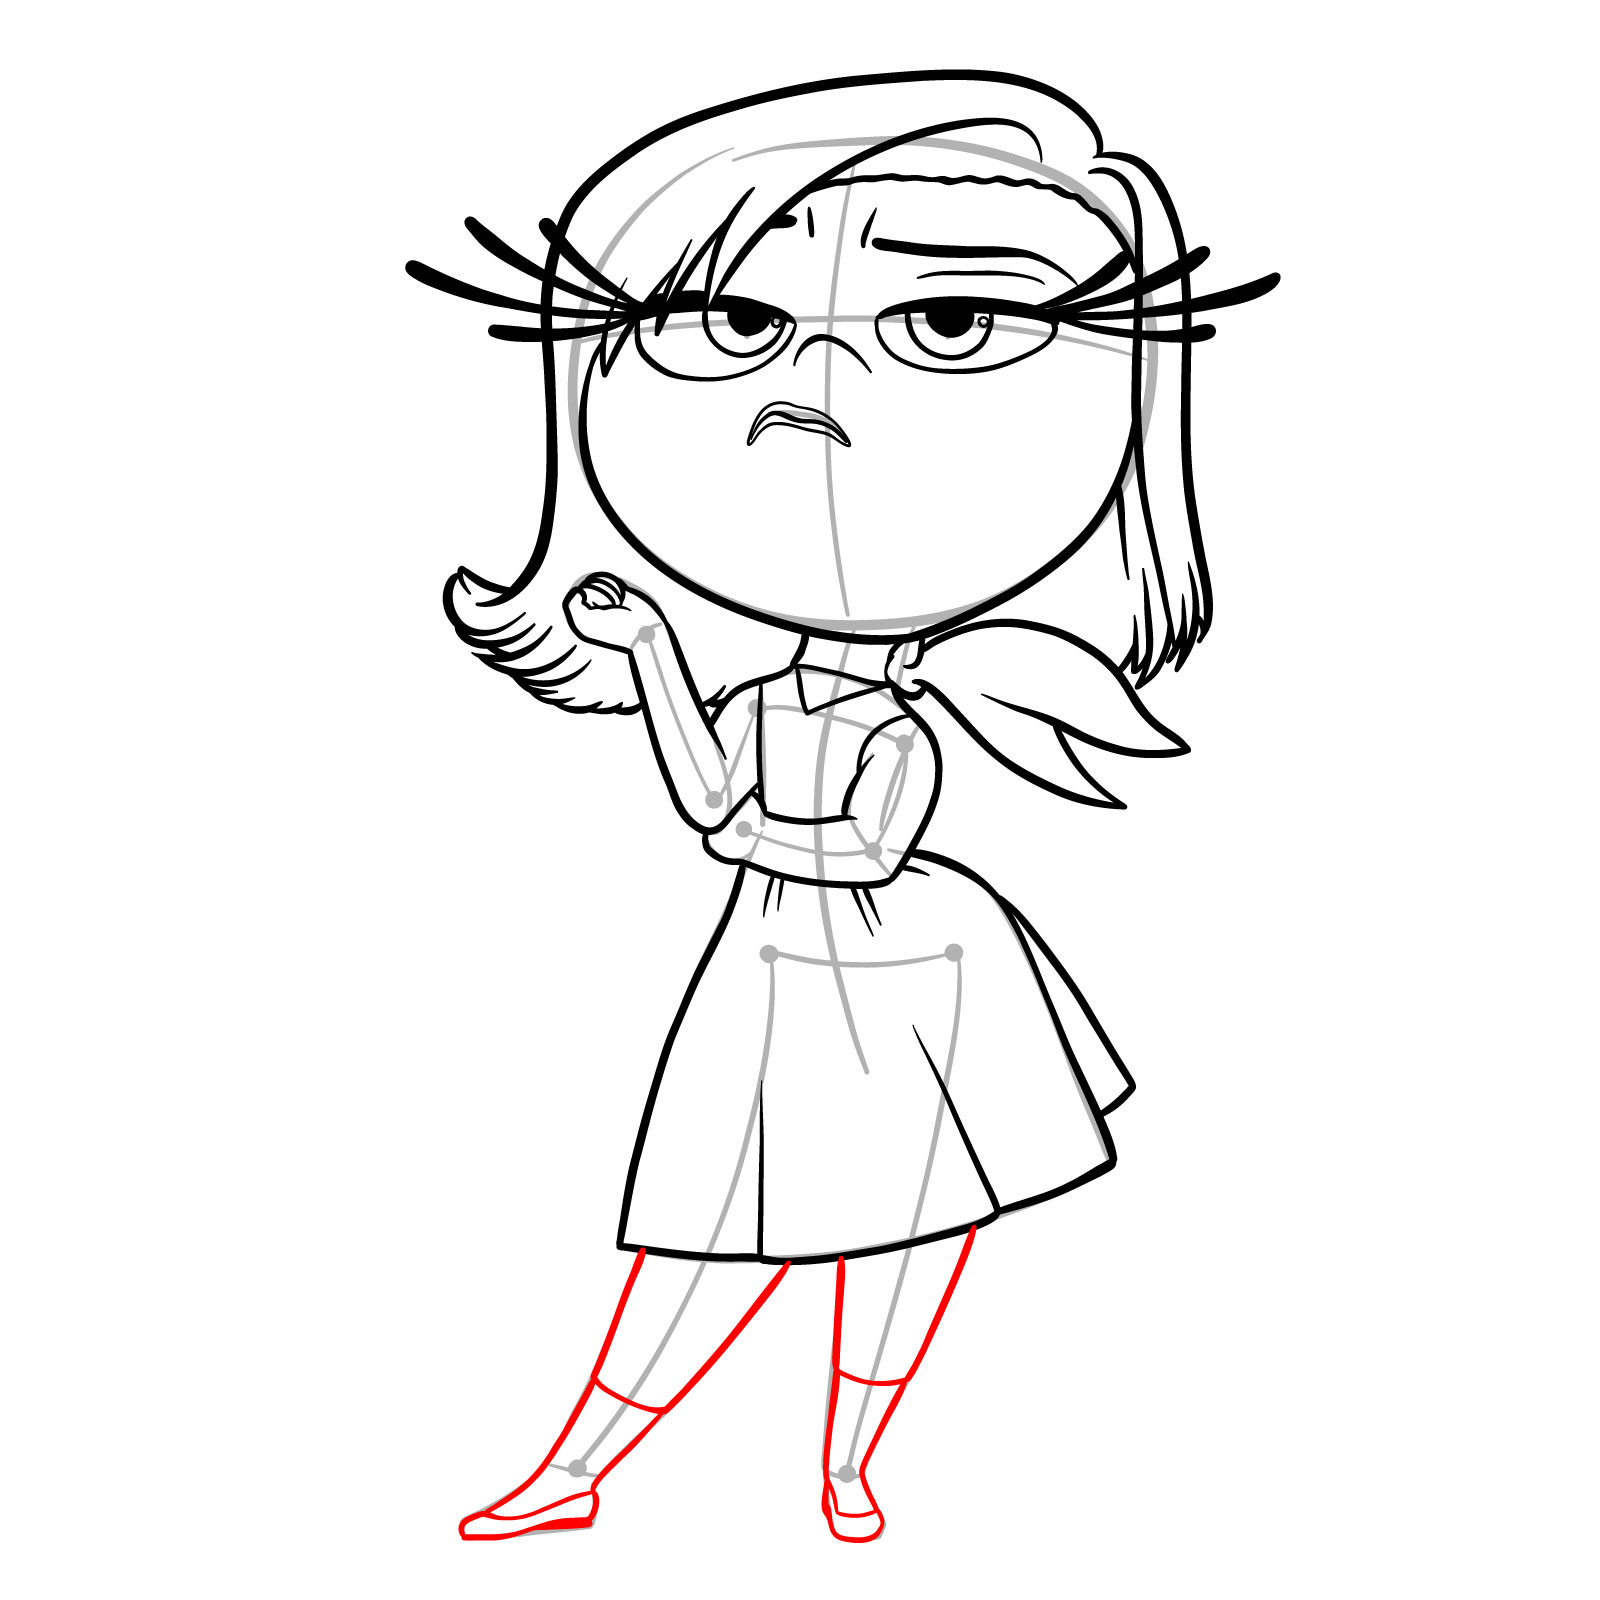 How to draw Disgust from Inside Out 2 - step 14